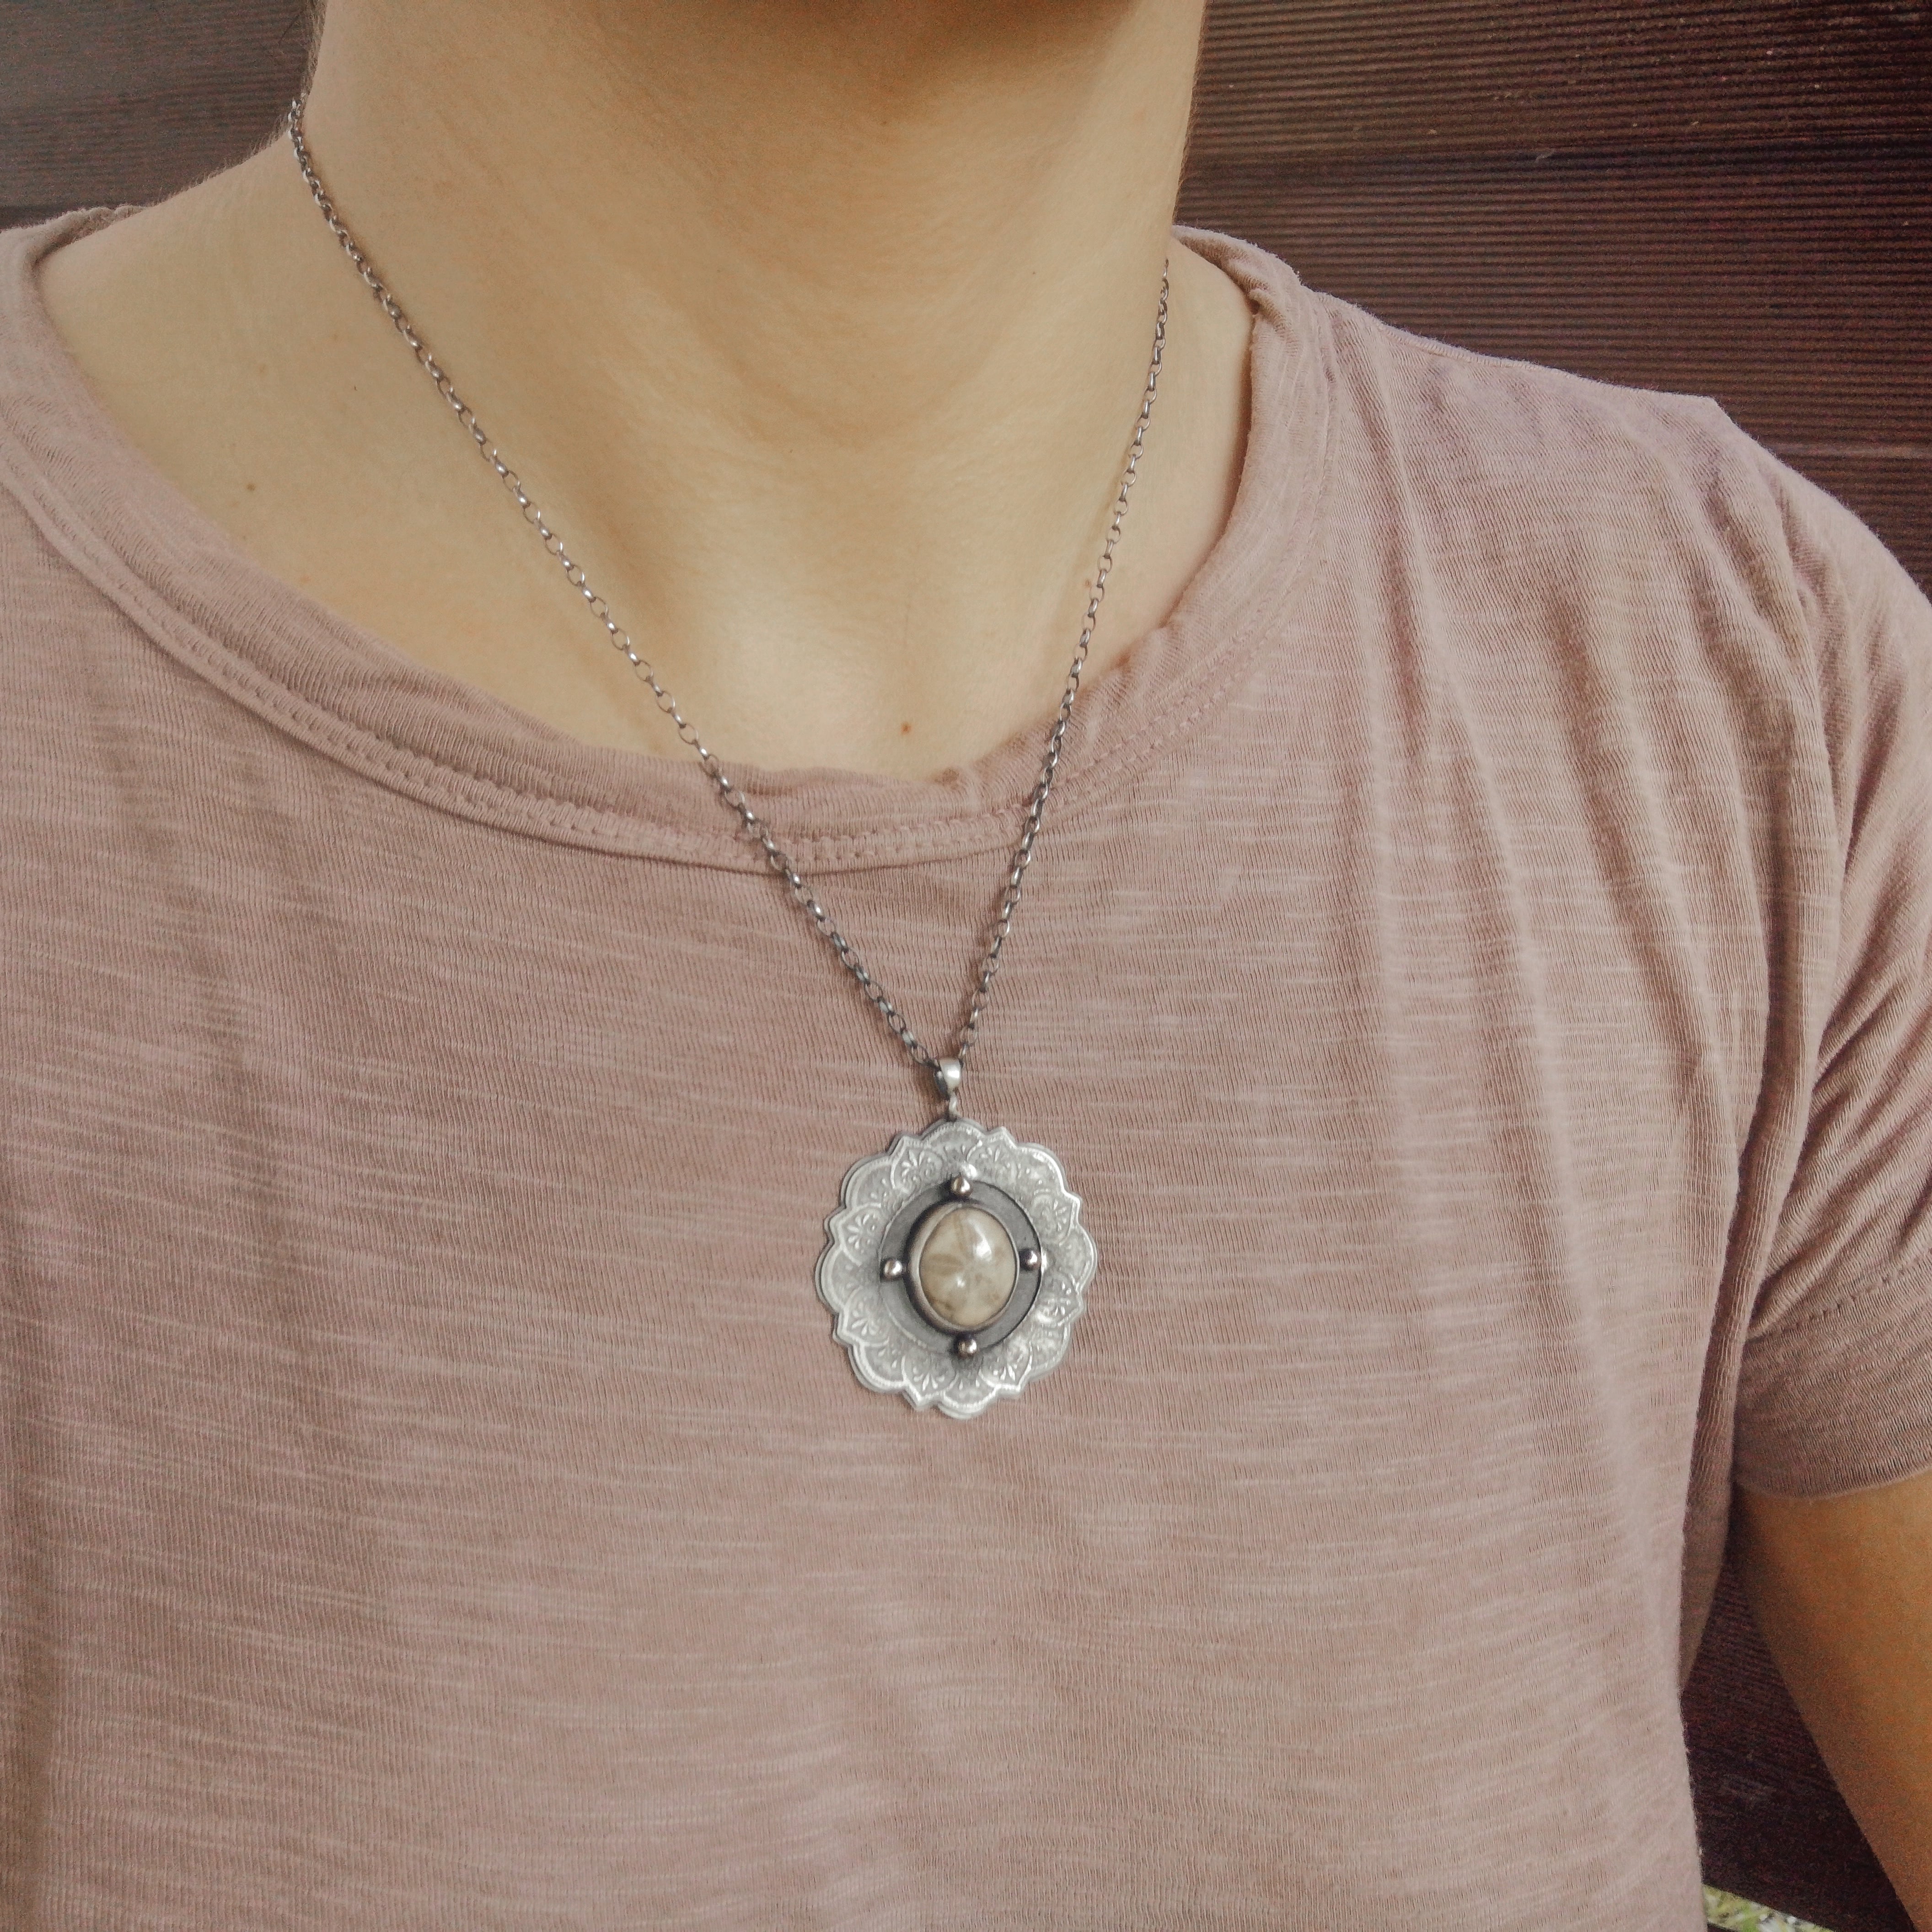 The Mandala & Sea Biscuit Necklace II